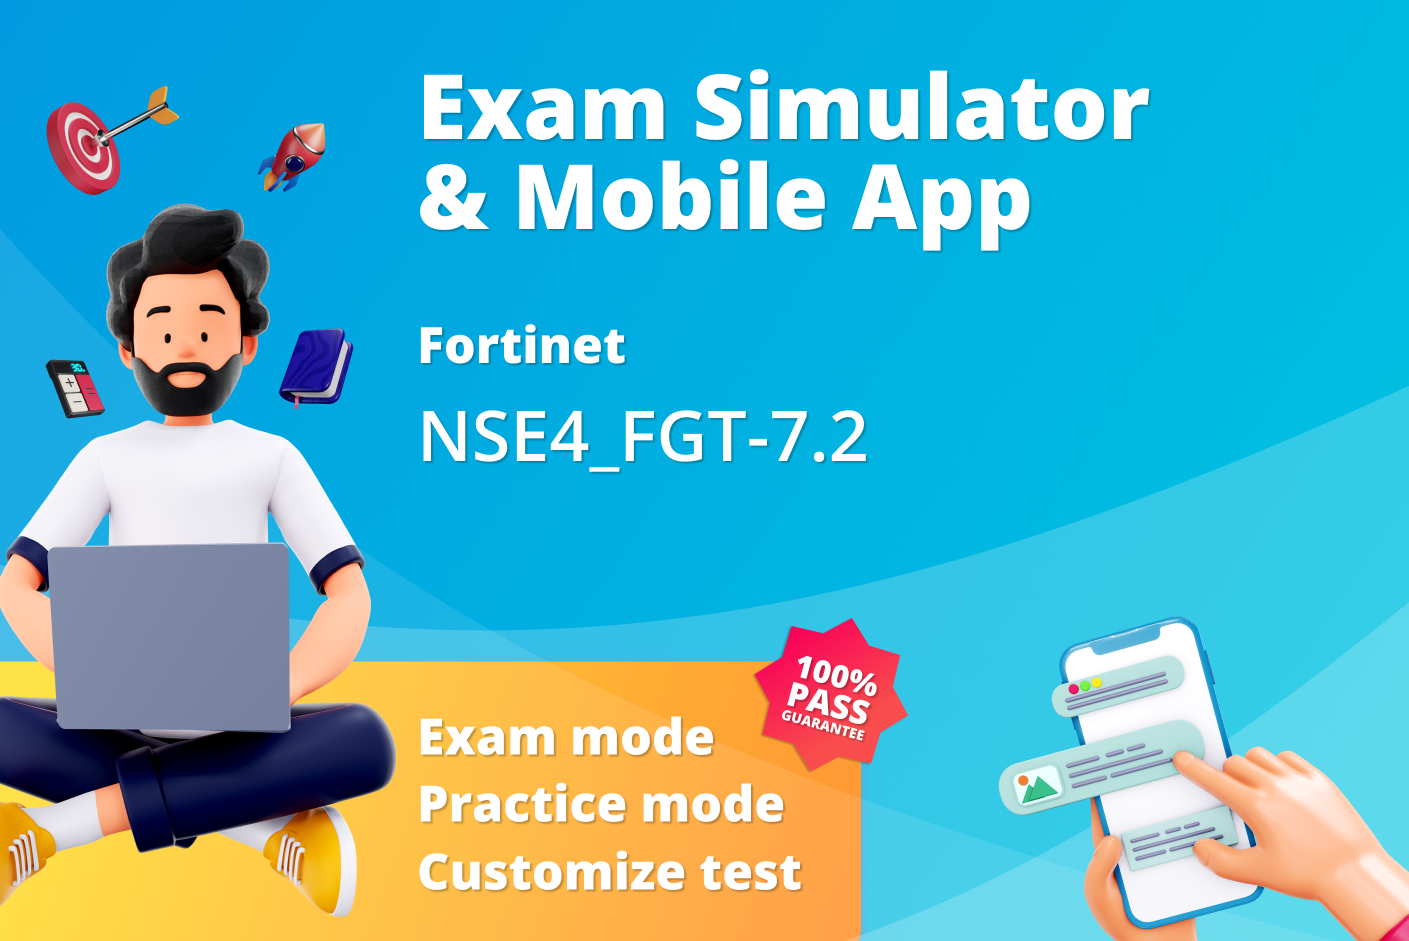 Fortinet NSE4_FGT-7.2 mock exams - Trusted preparation resource for India's cybersecurity professionals